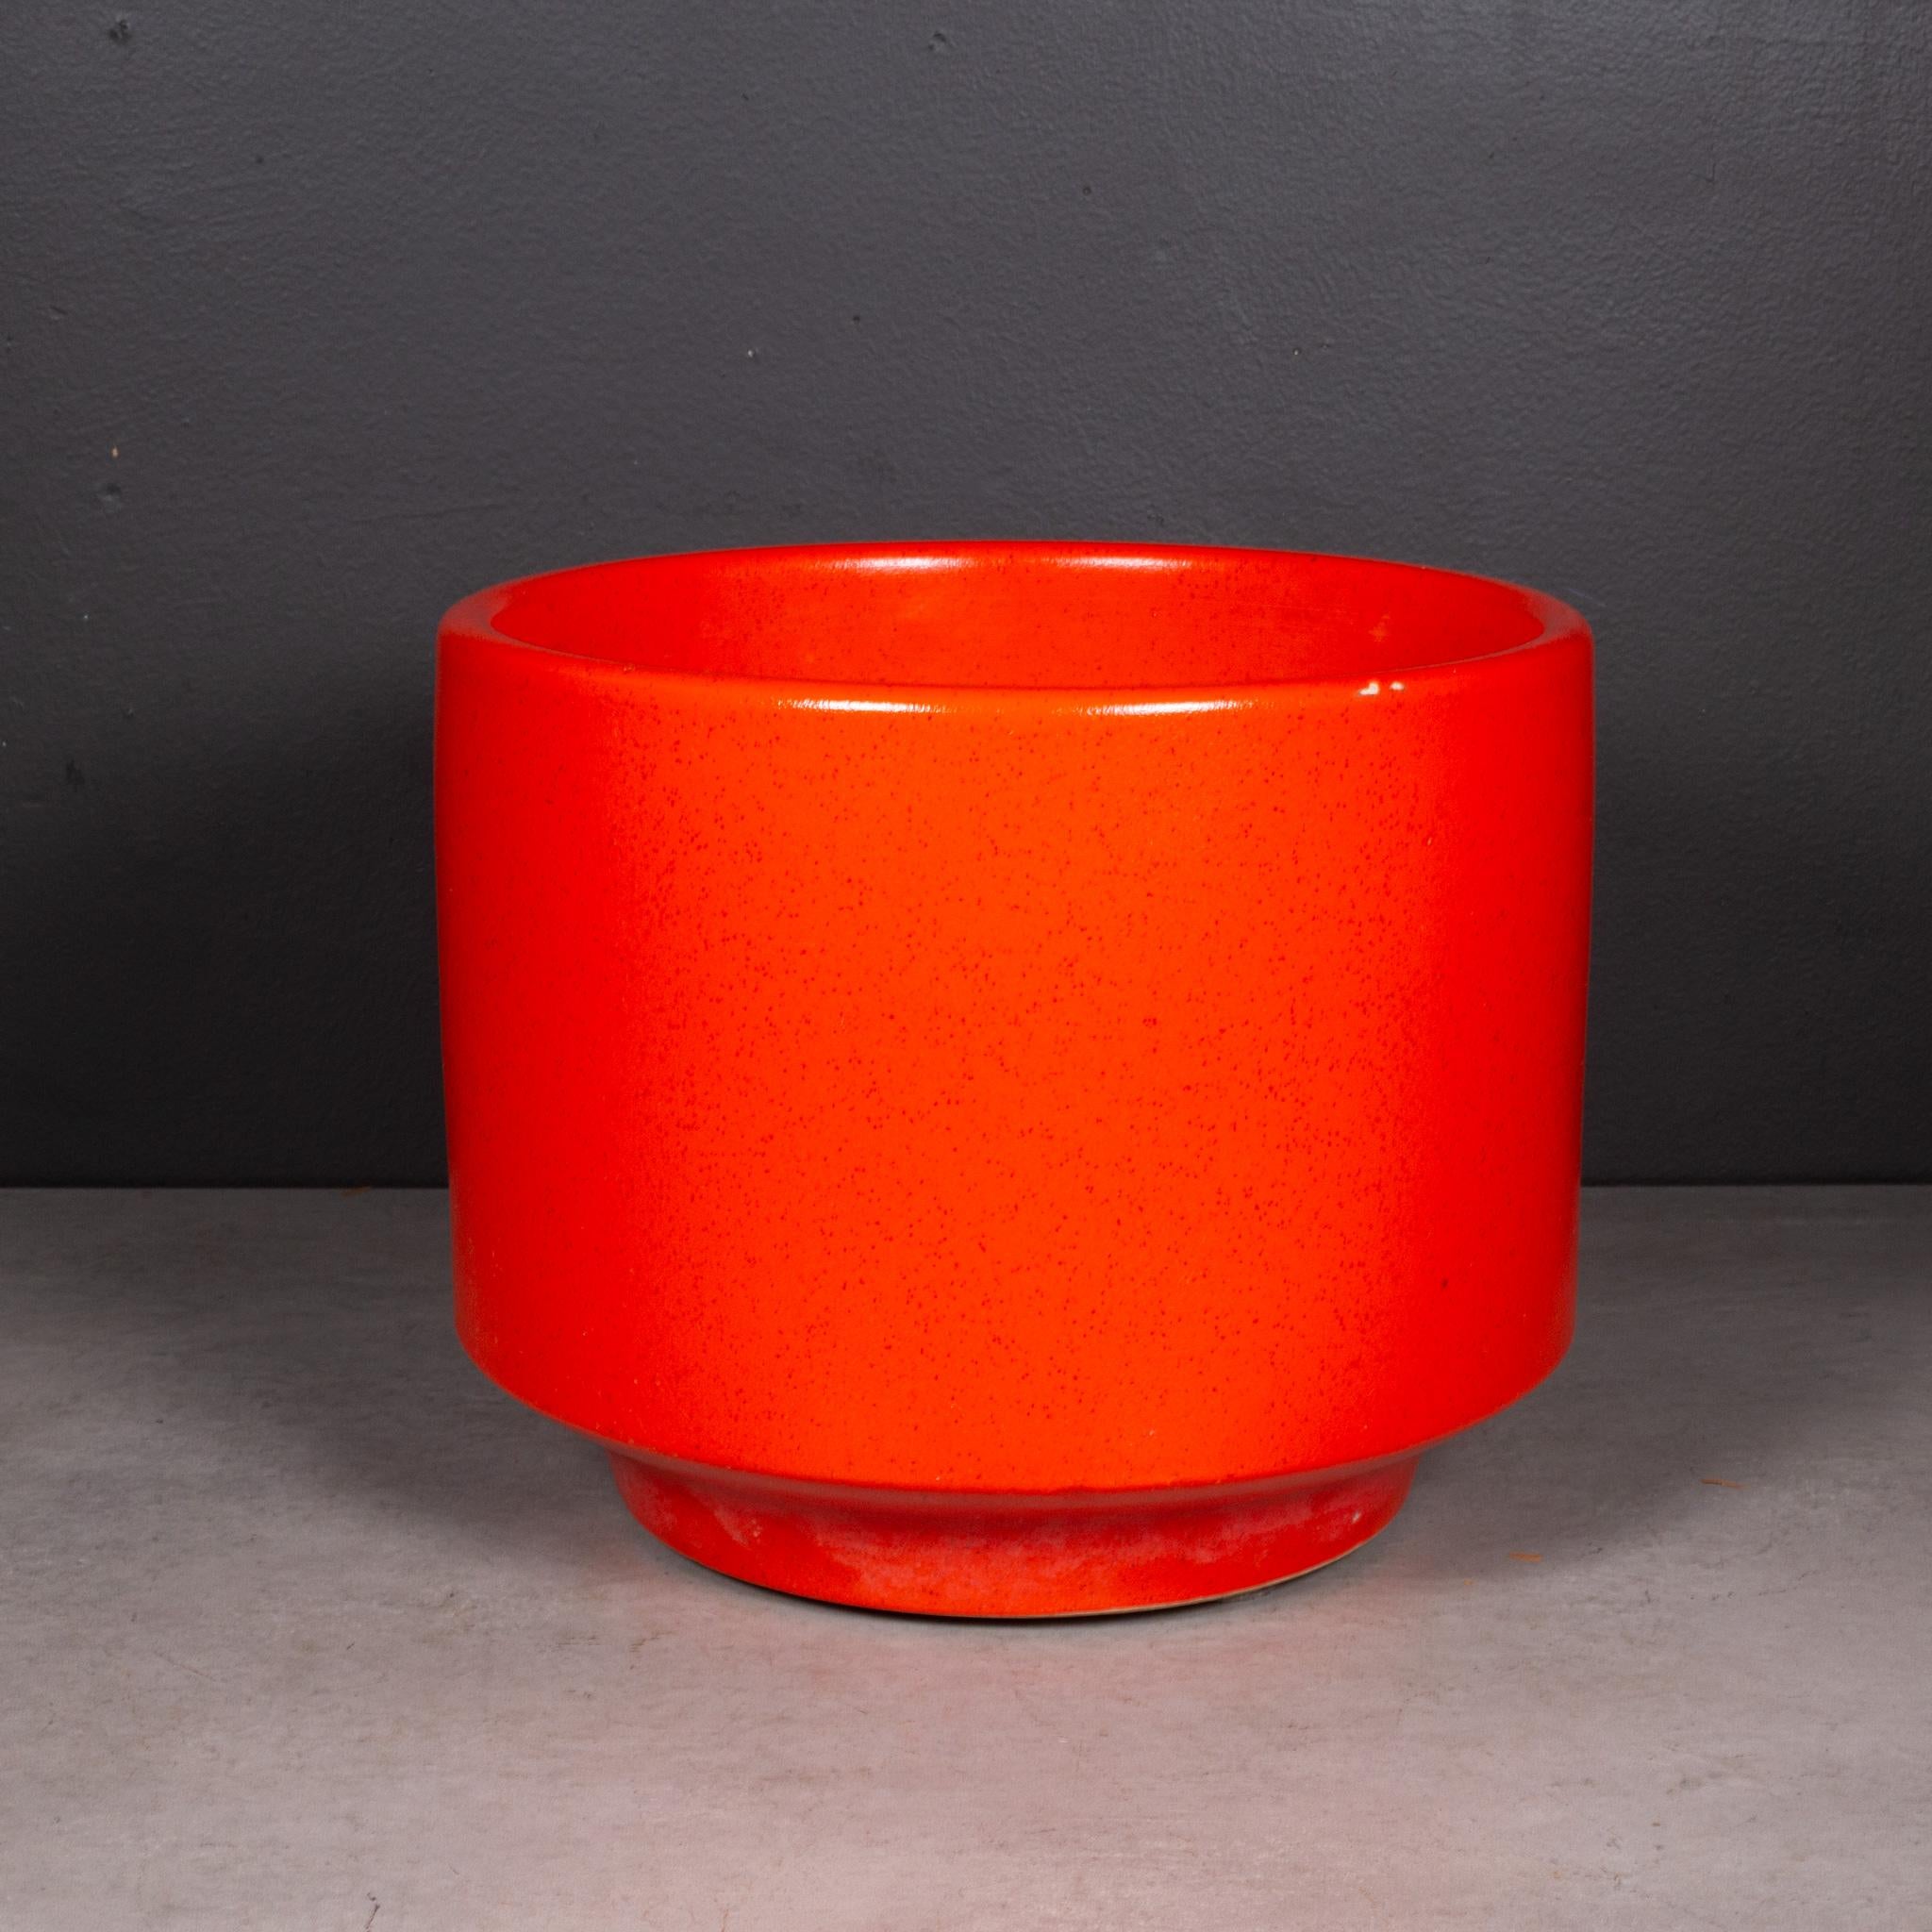 ABOUT

A mid-century orange-red, black speckled ceramic plant pot.

    CREATOR Possibly Gainey Ceramics, La Verne, California.
    DATE OF MANUFACTURE 1960.
    MATERIALS AND TECHNIQUES Ceramic.
    CONDITION Good. Wear consistent with age and use.